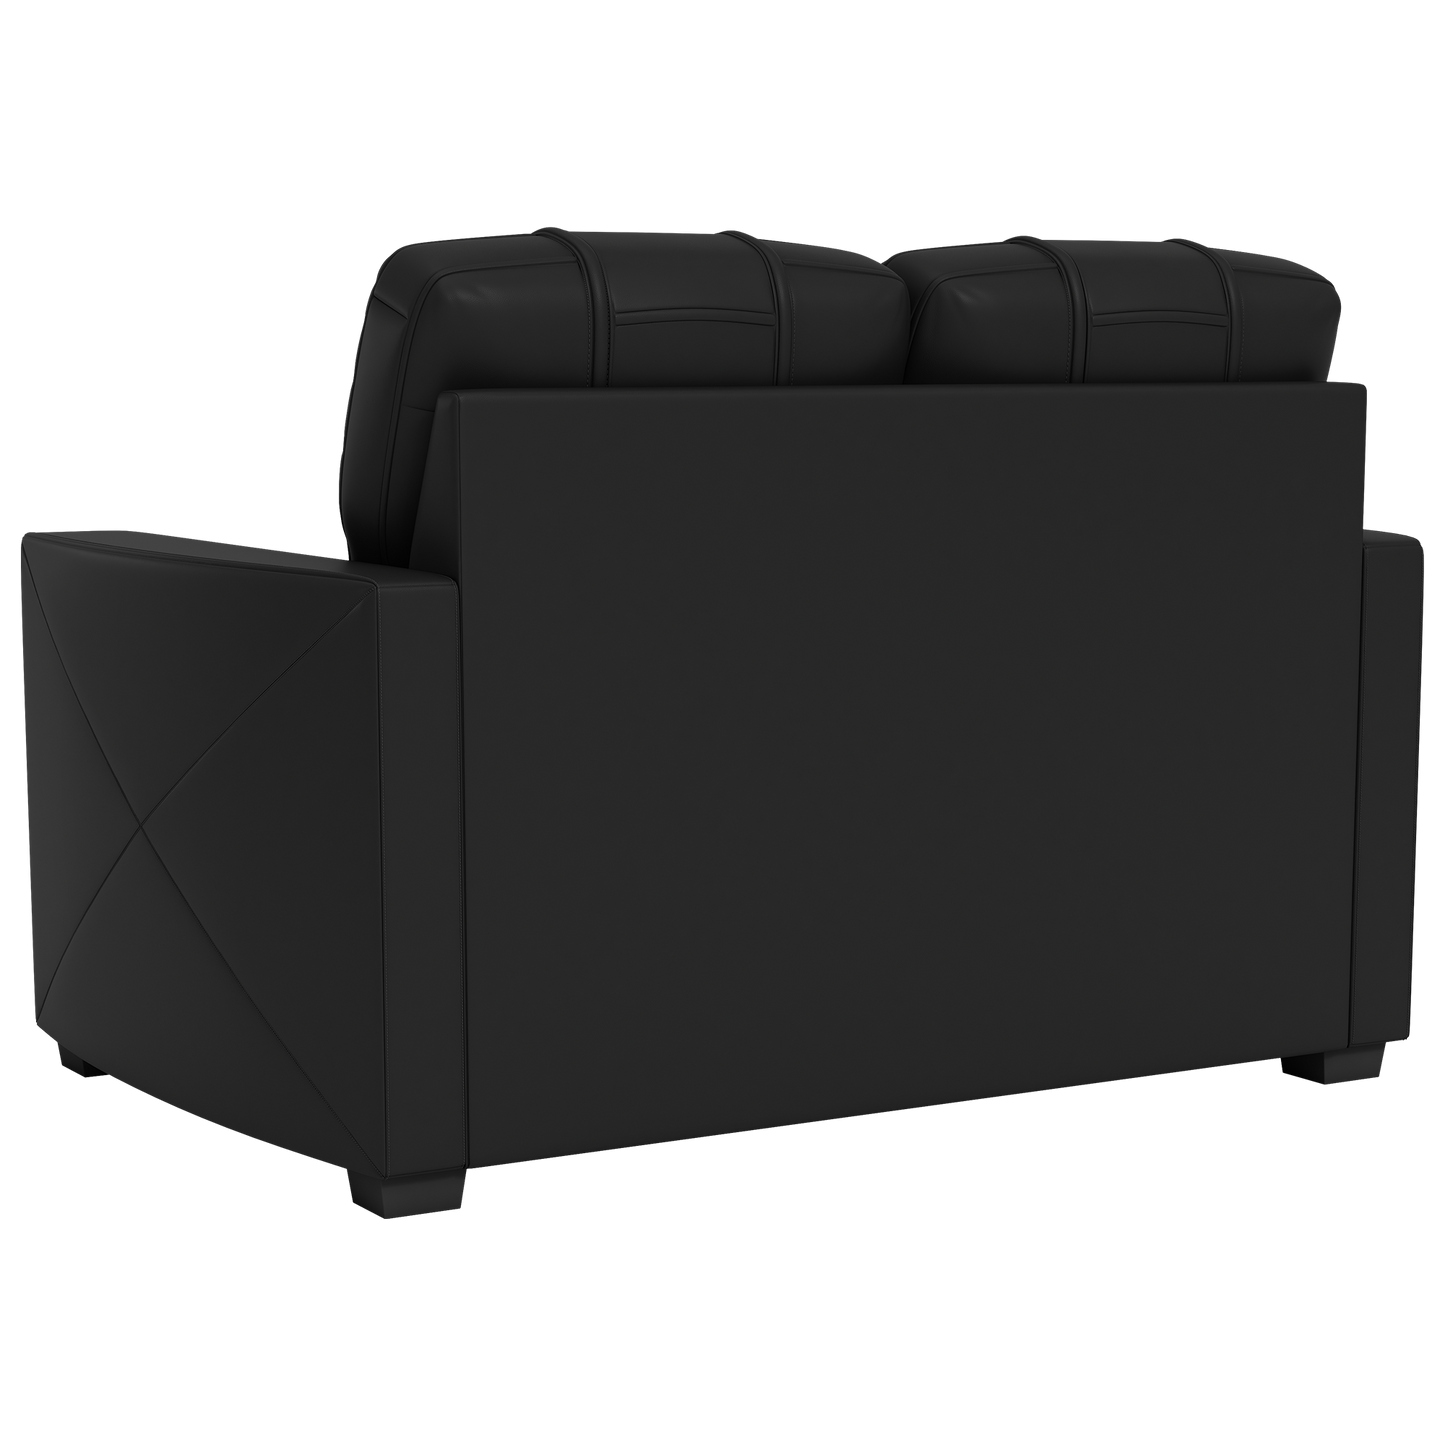 Silver Loveseat with Zipchair Gaming Logo